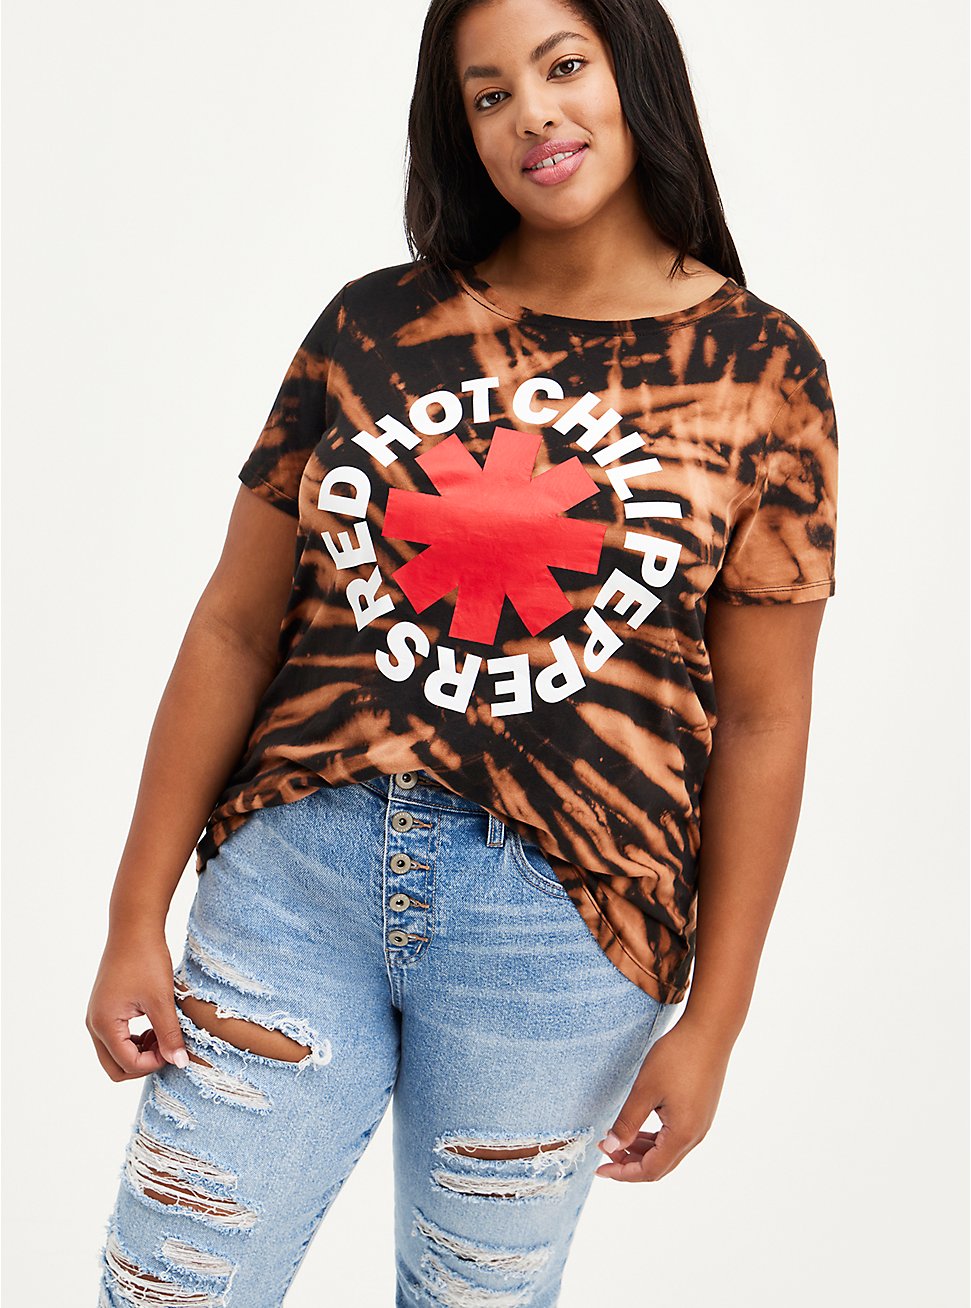 Classic Fit Crew Tee - Red Hot Chili Peppers Black Tie Dye, DEEP BLACK, hi-res